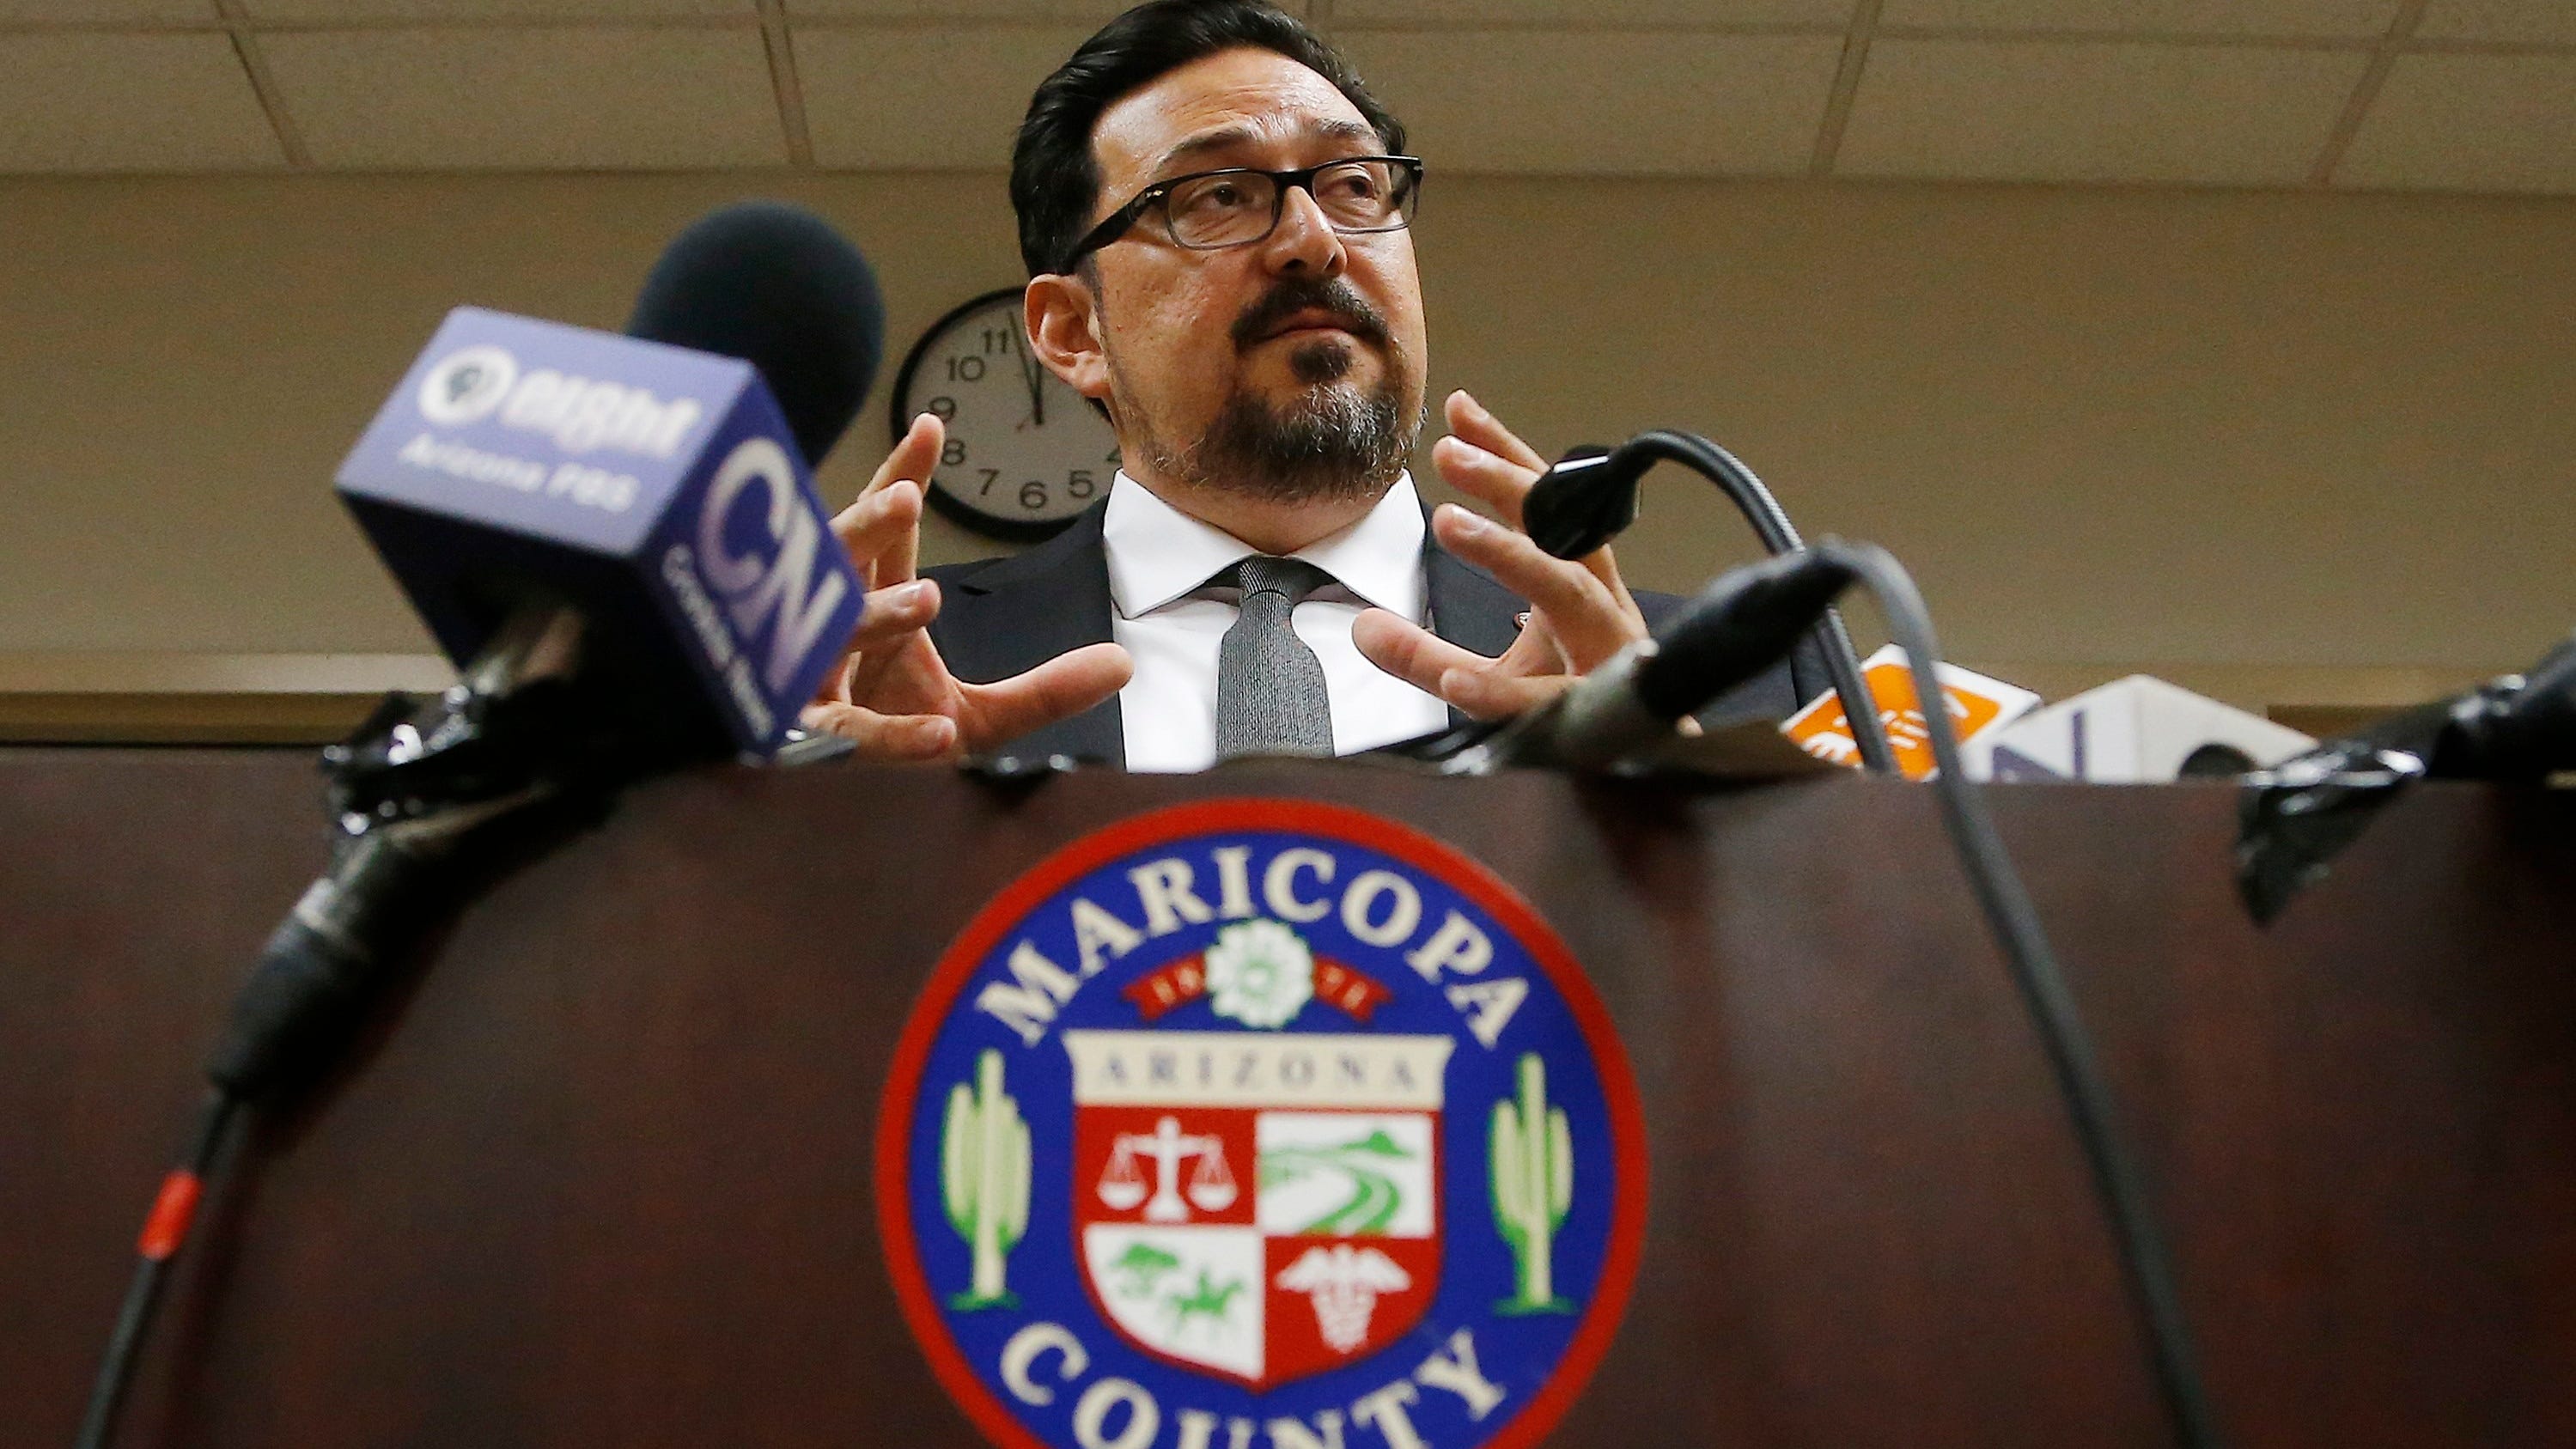 Maricopa County Recorder Adrian Fontes speaks during a news conference in Phoenix on Sept. 12, 2018.